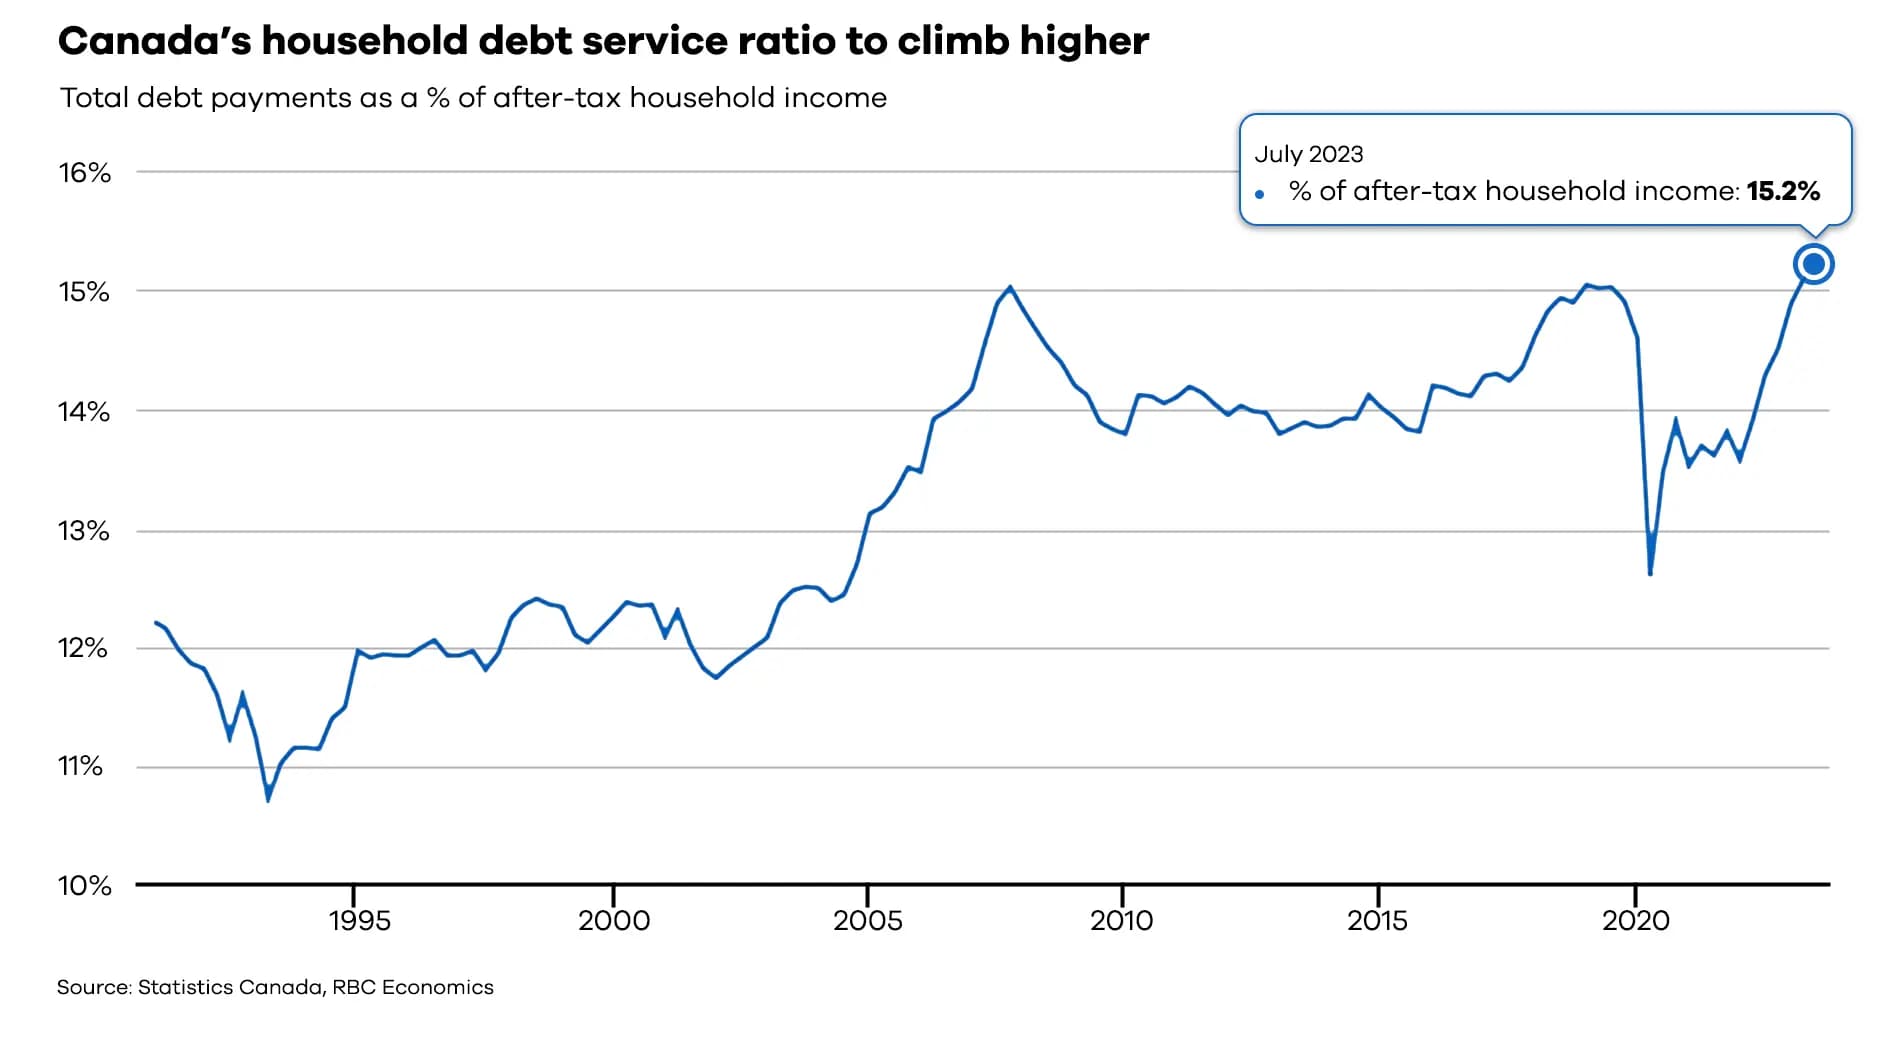 household debt payments on a collision course